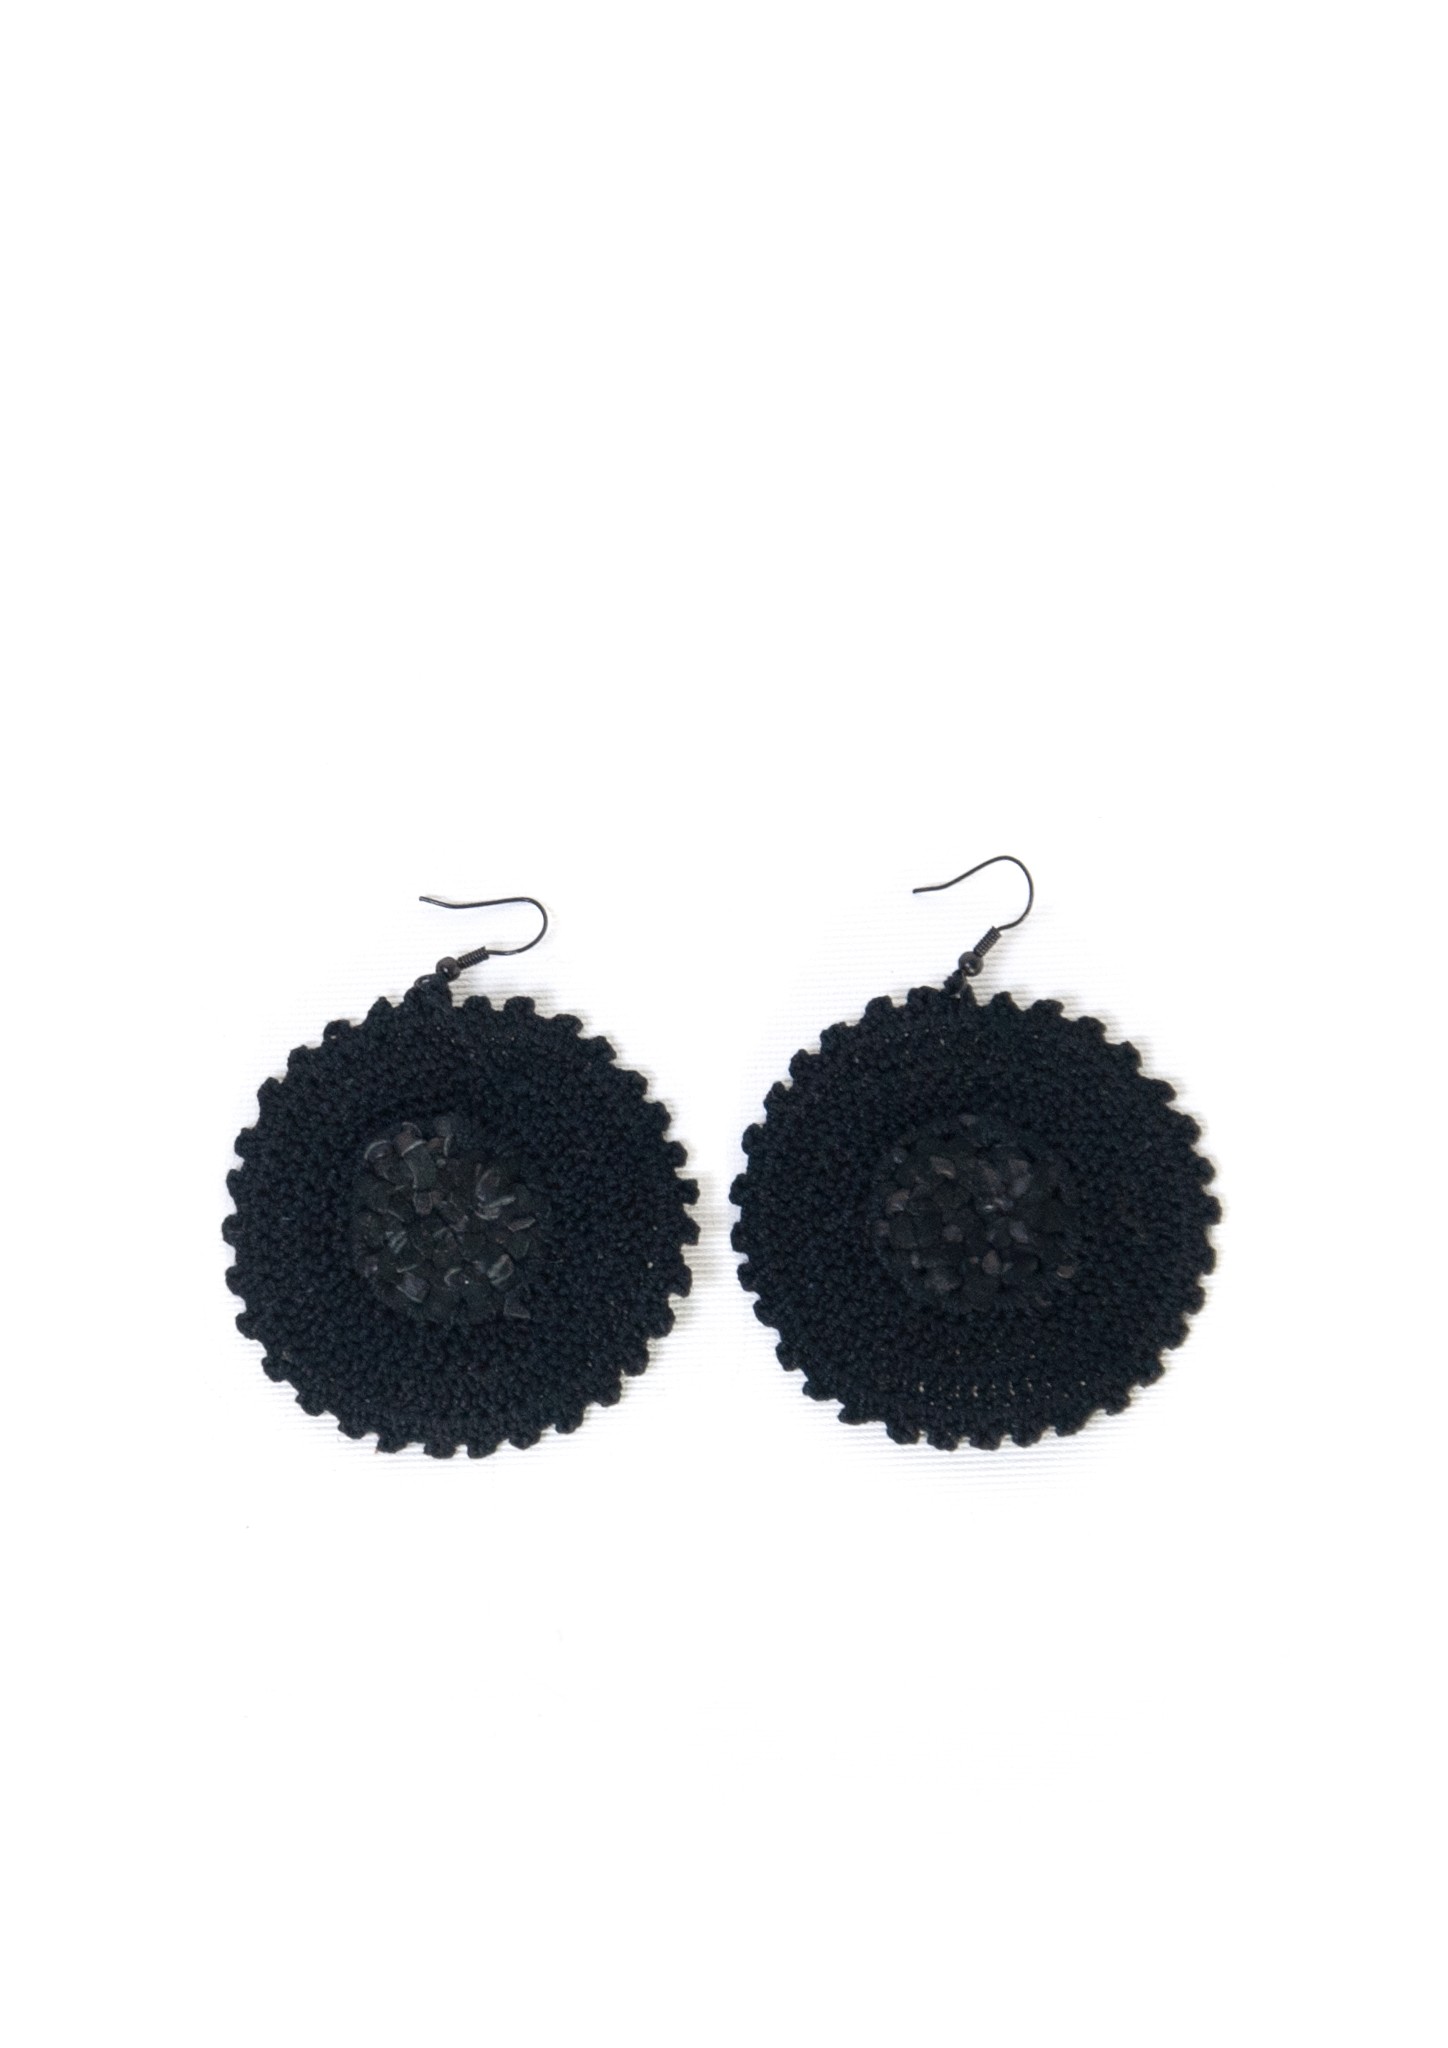 Handcrafted Leather Lace Earrings